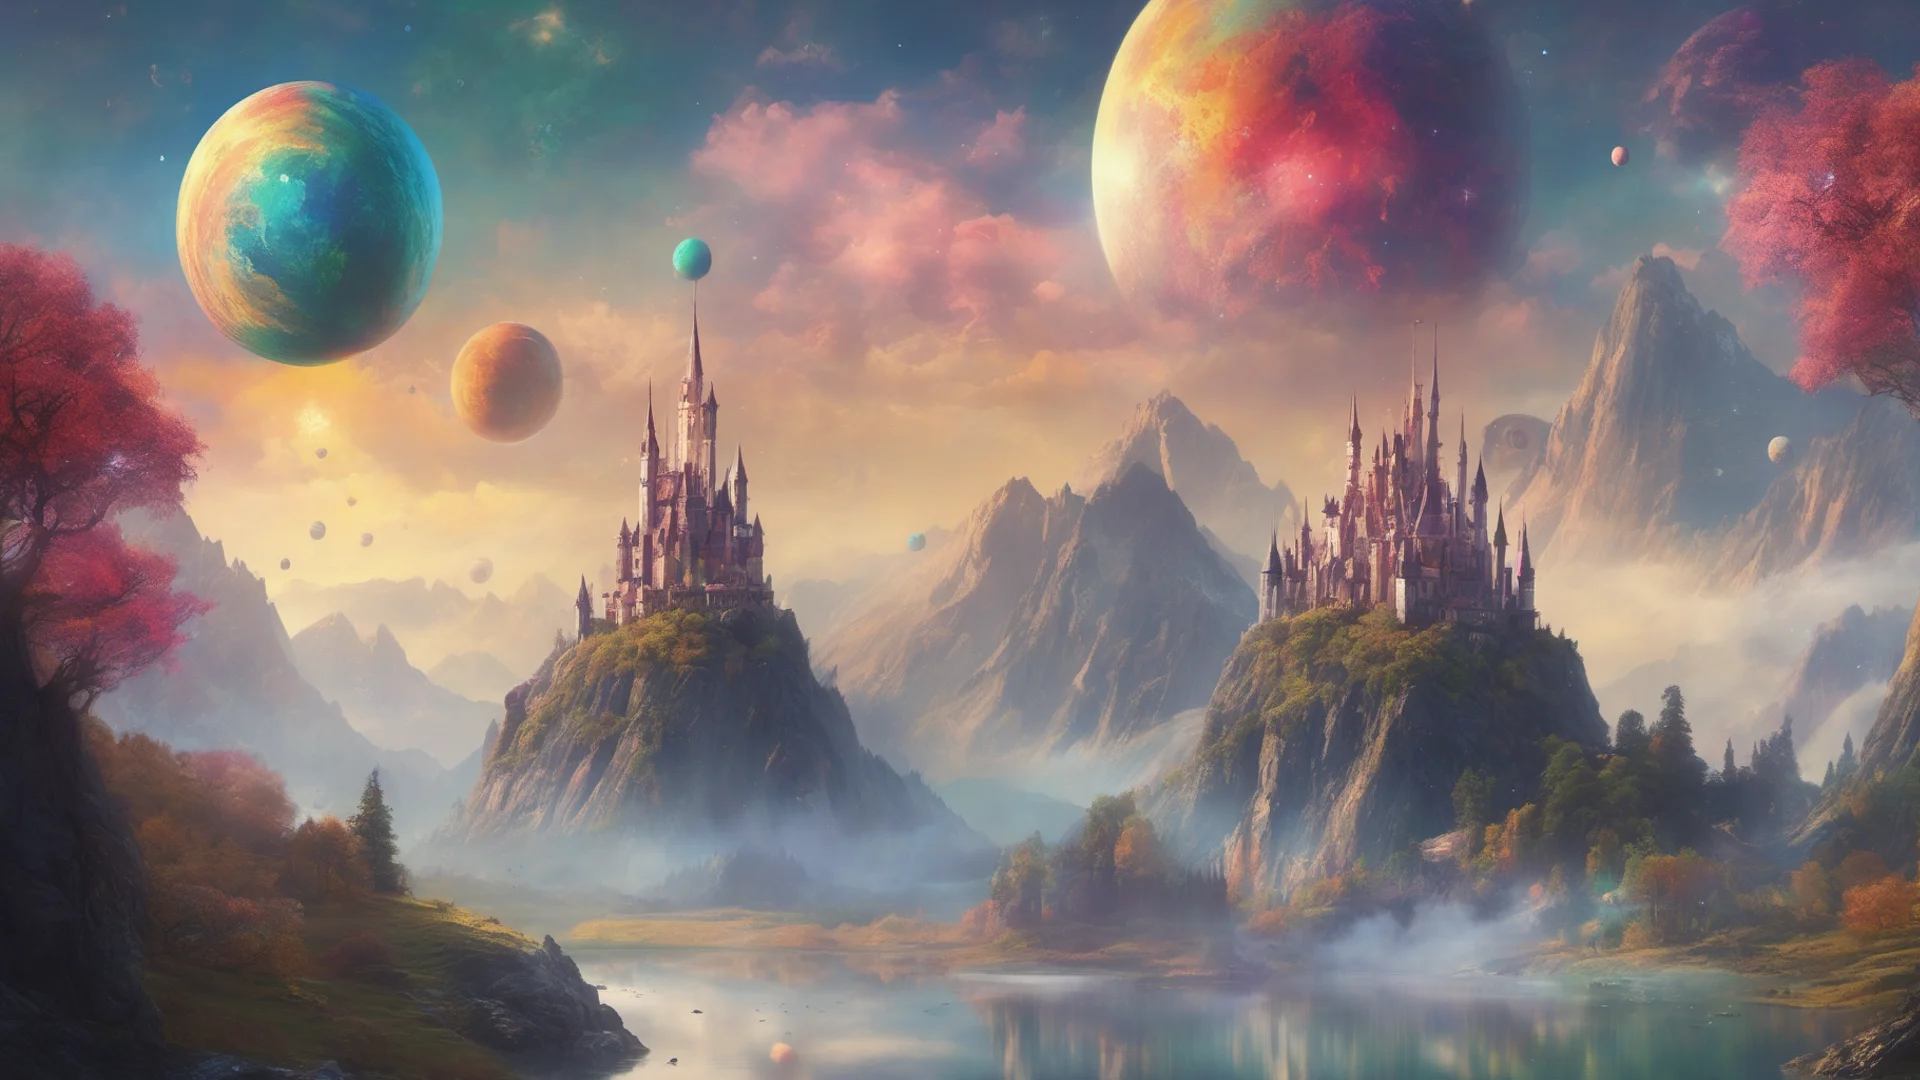 epic fantasy environment castle on tall mountain lakes sky with many colorful planets   confident engaging wow artstation art 3 wide